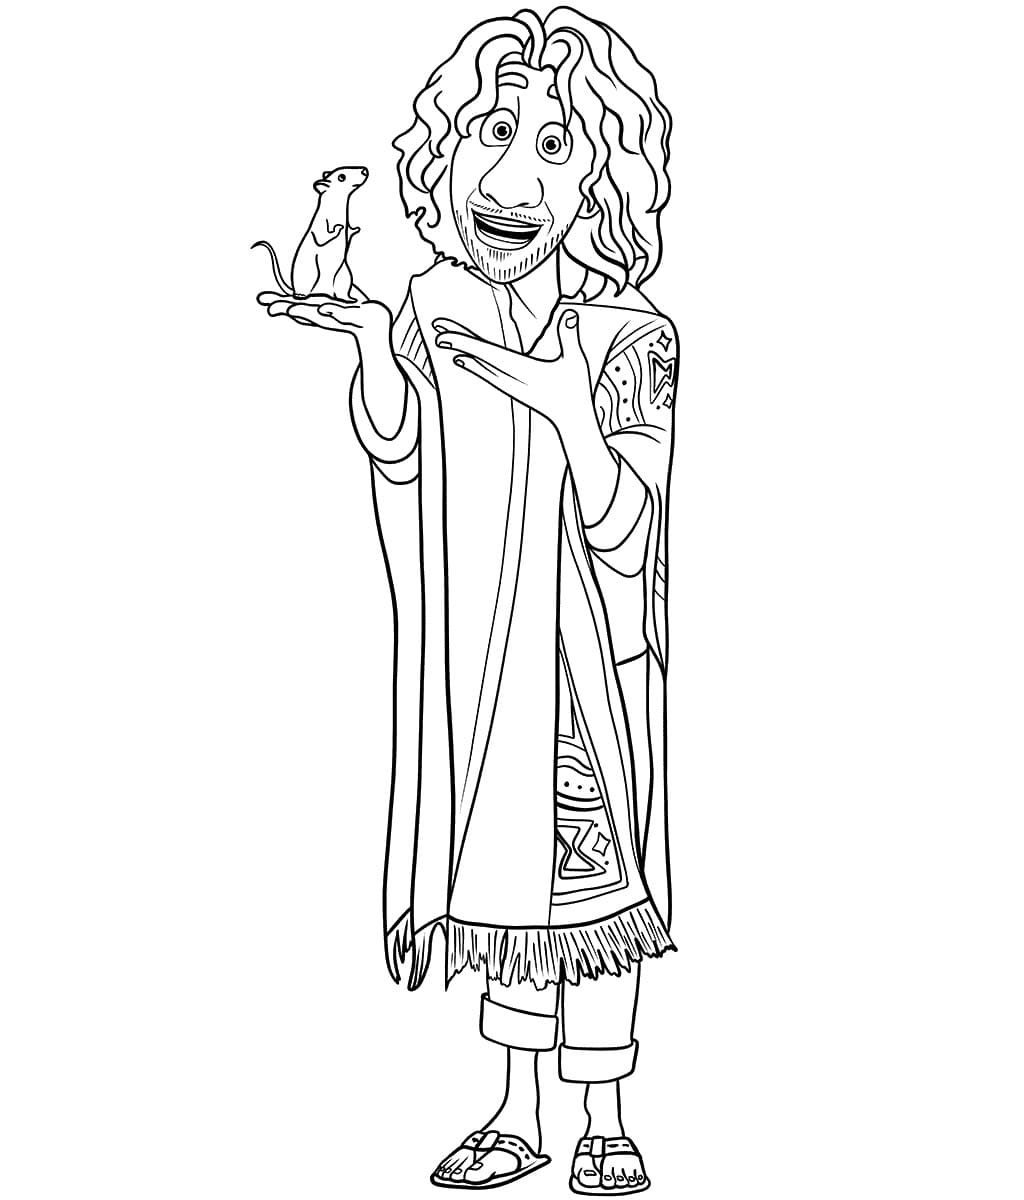 Bruno from Encanto coloring page - Download, Print or Color Online for Free